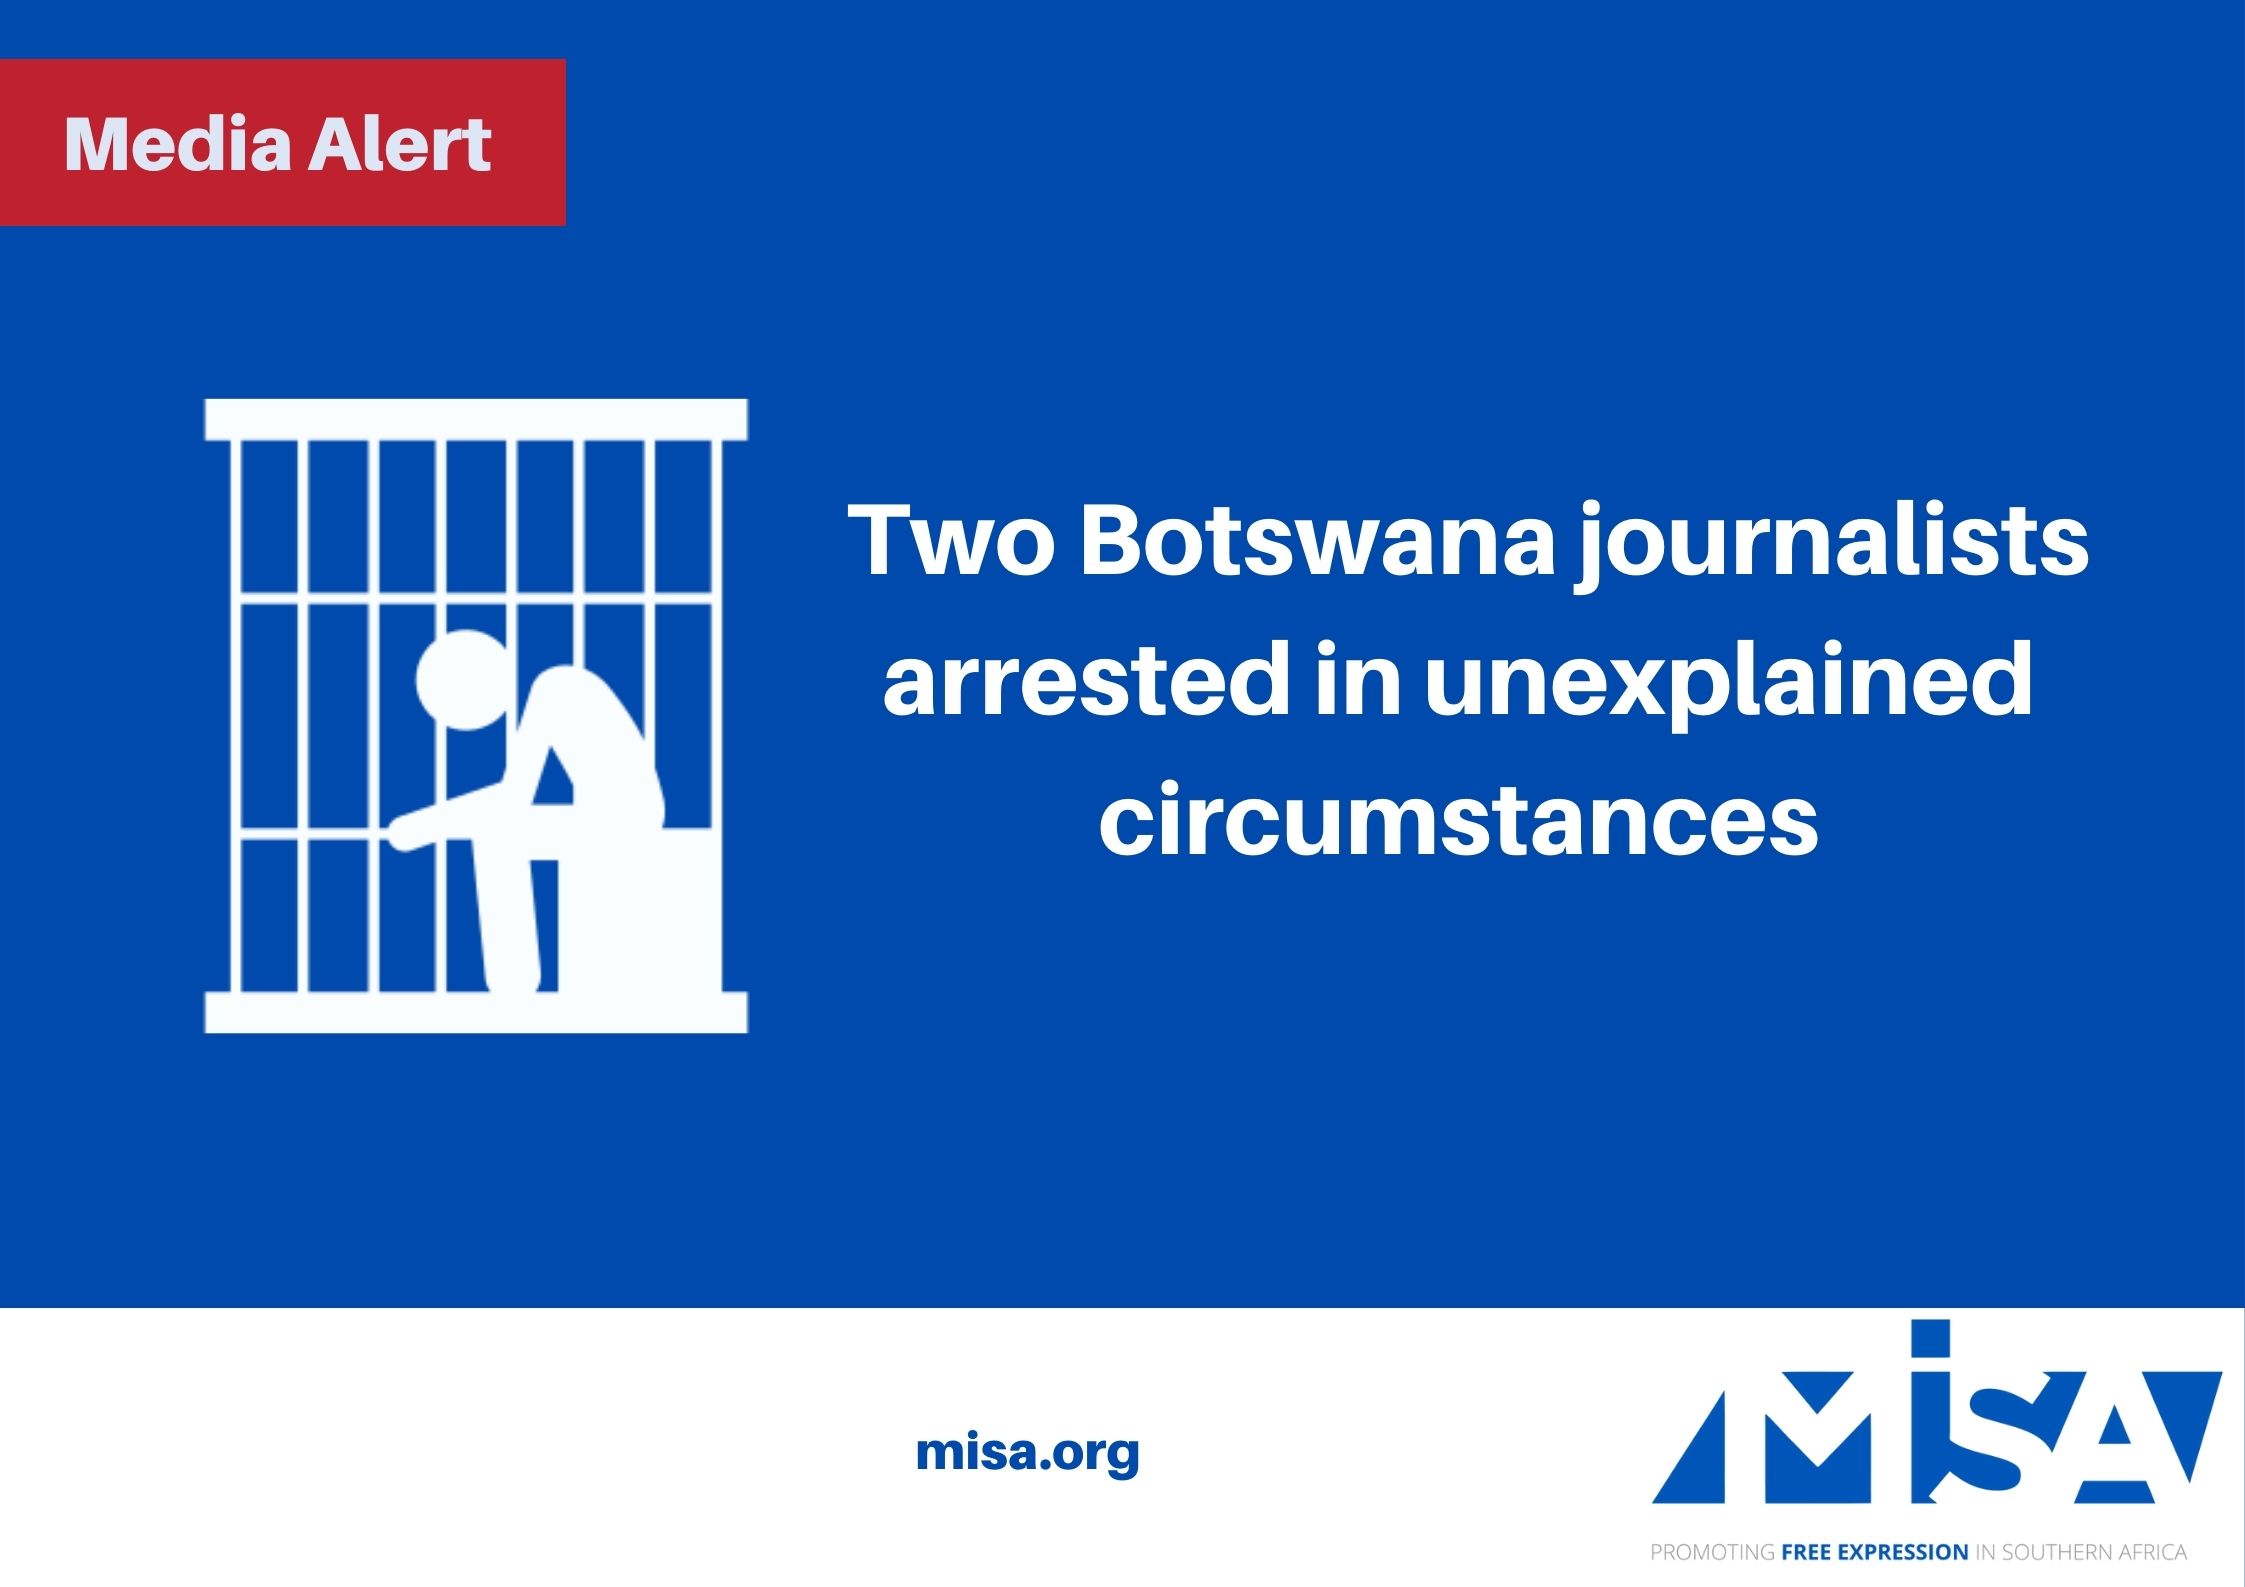 Two Botswana journalists arrested in unexplained circumstances.